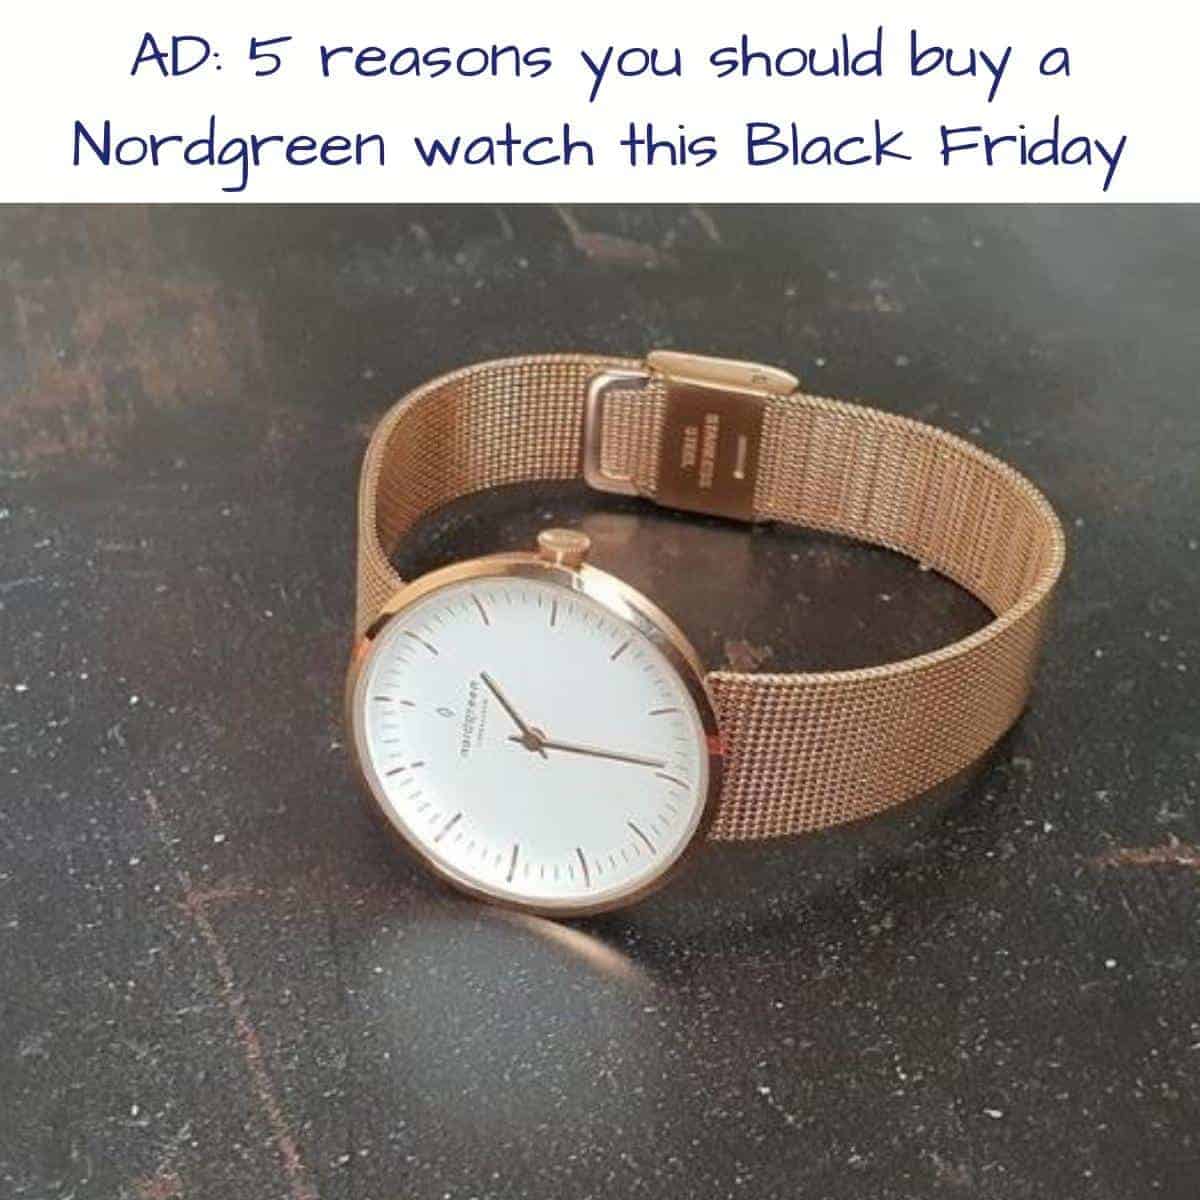 AD: 5 reasons you should buy a Nordgreen watch with a 35% discount